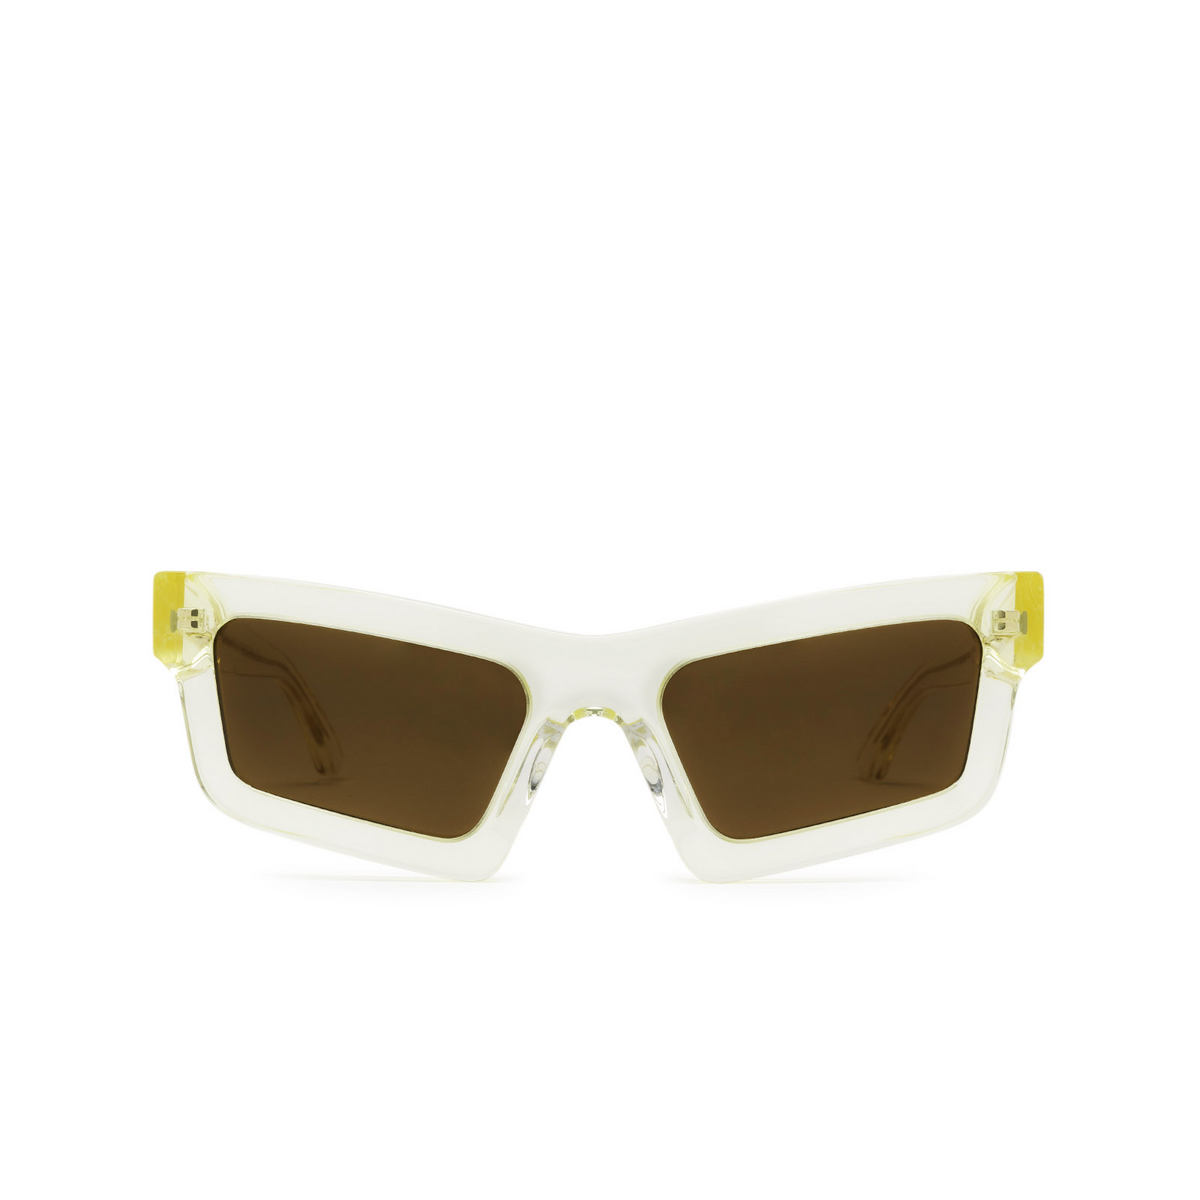 Huma TILDE Sunglasses 02 Champagne - front view